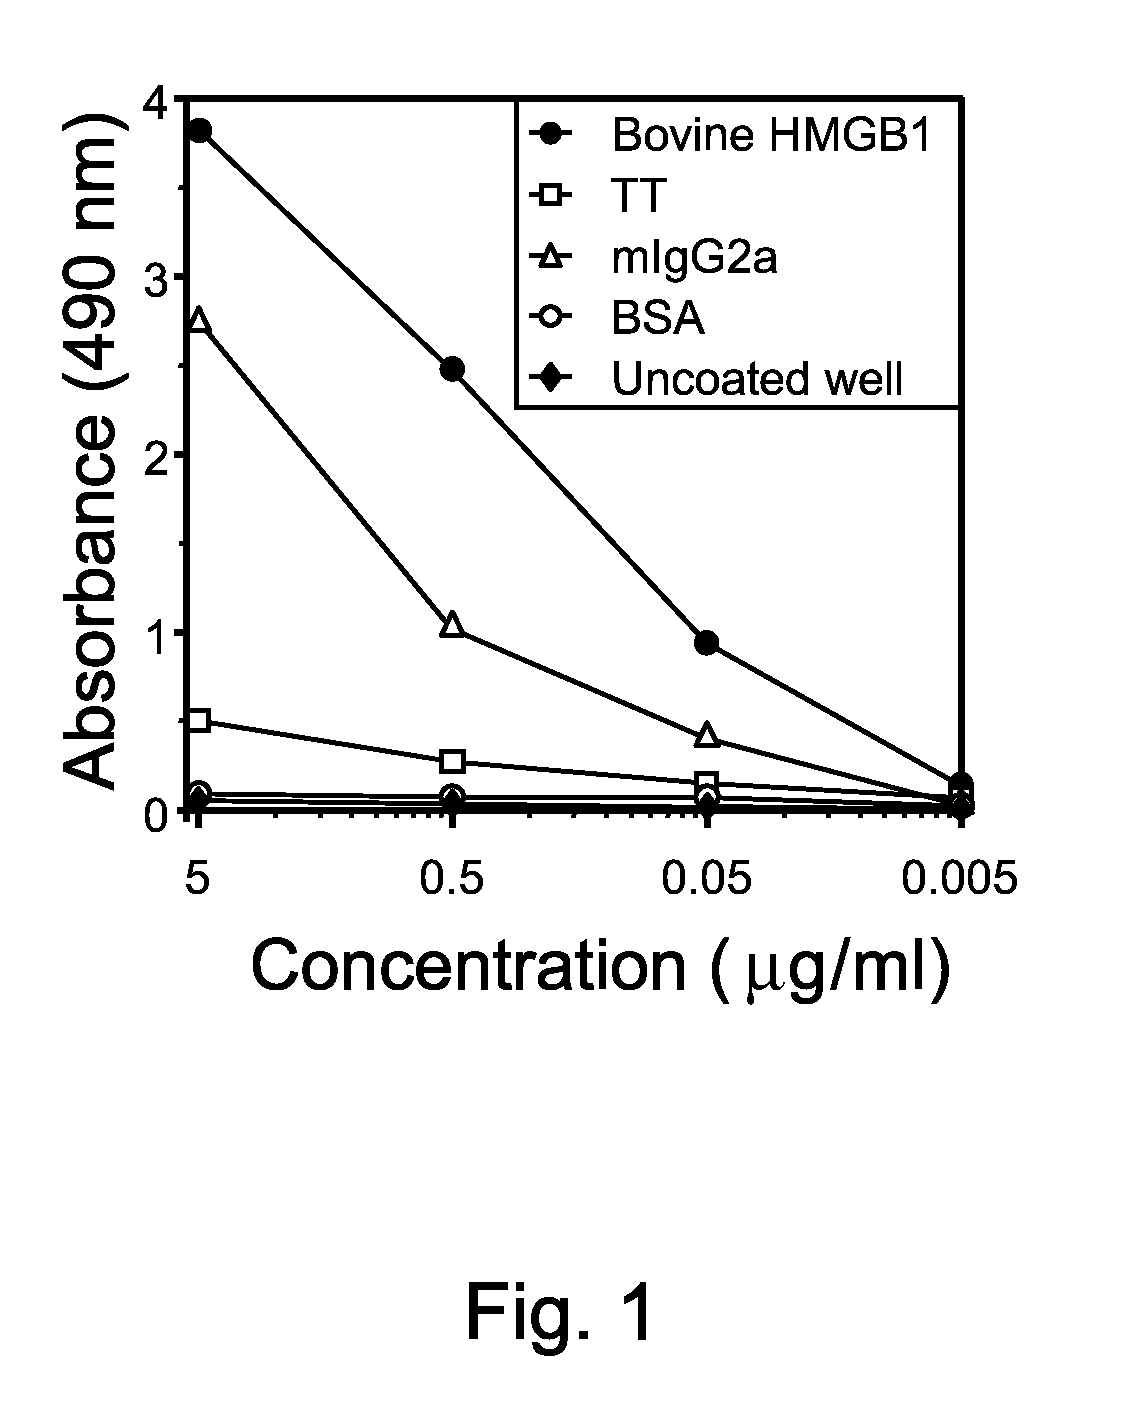 Method for producing complete human neutralizing antibody for high mobility group box 1 (HMGB1) and the use to treat or inhibit HMGB1-associated neuromyelitis